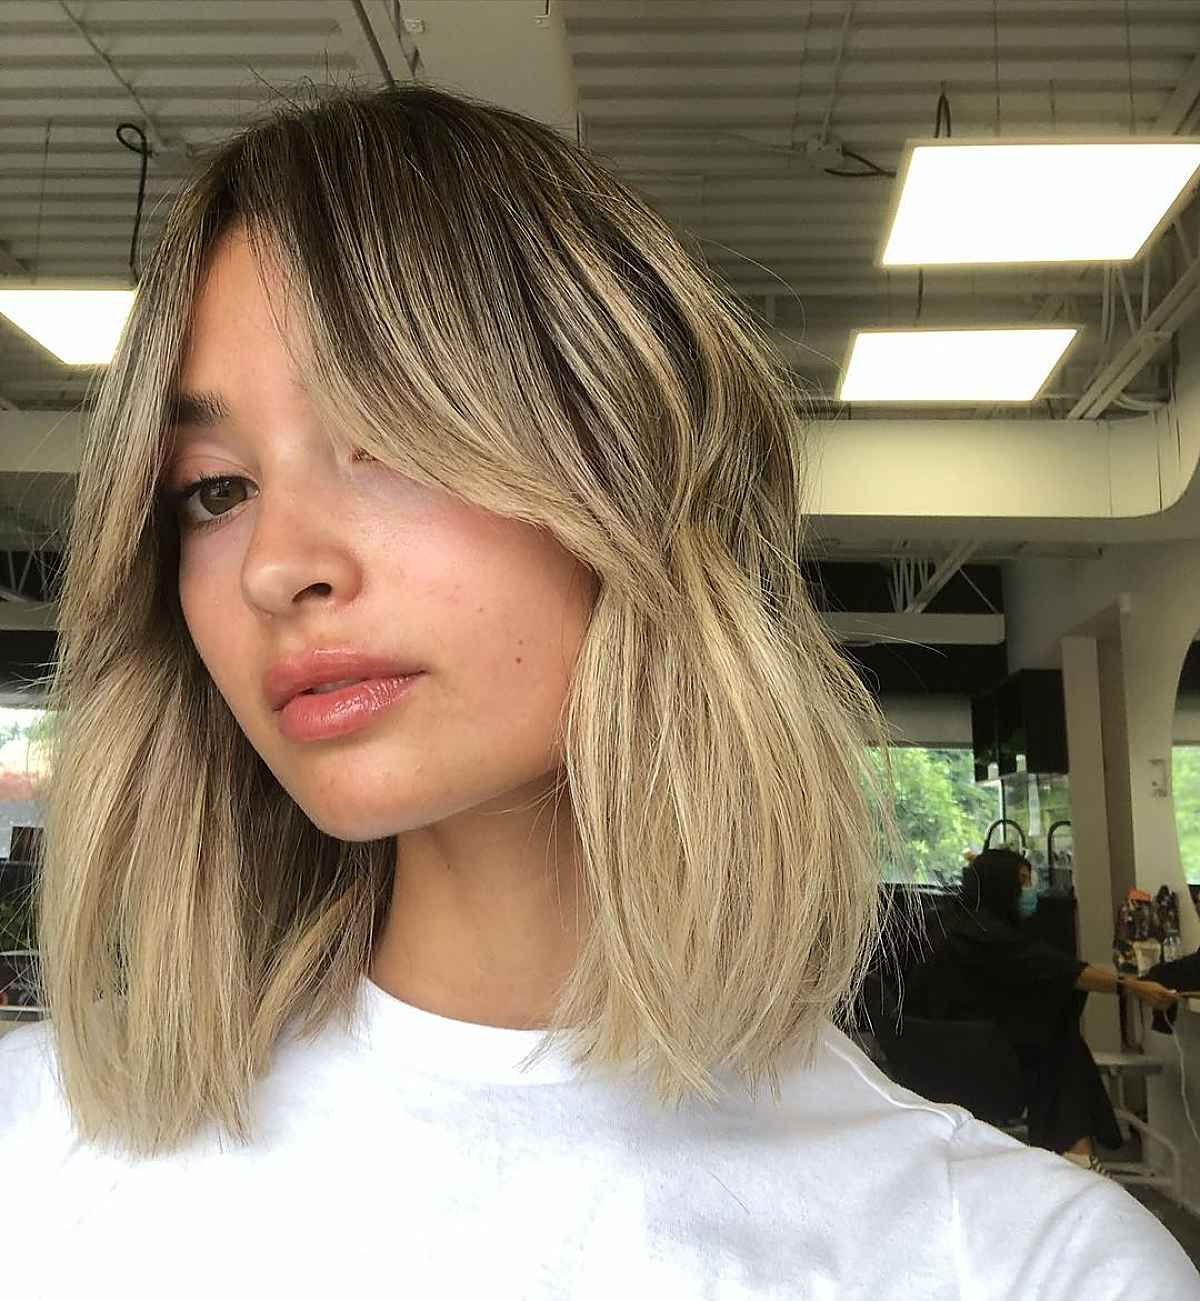 28 Best Ways To Pair A Long Bob With Curtain Bangs Regarding Recent Straight Blunt Haircut With Long Curtain Bangs (View 2 of 20)